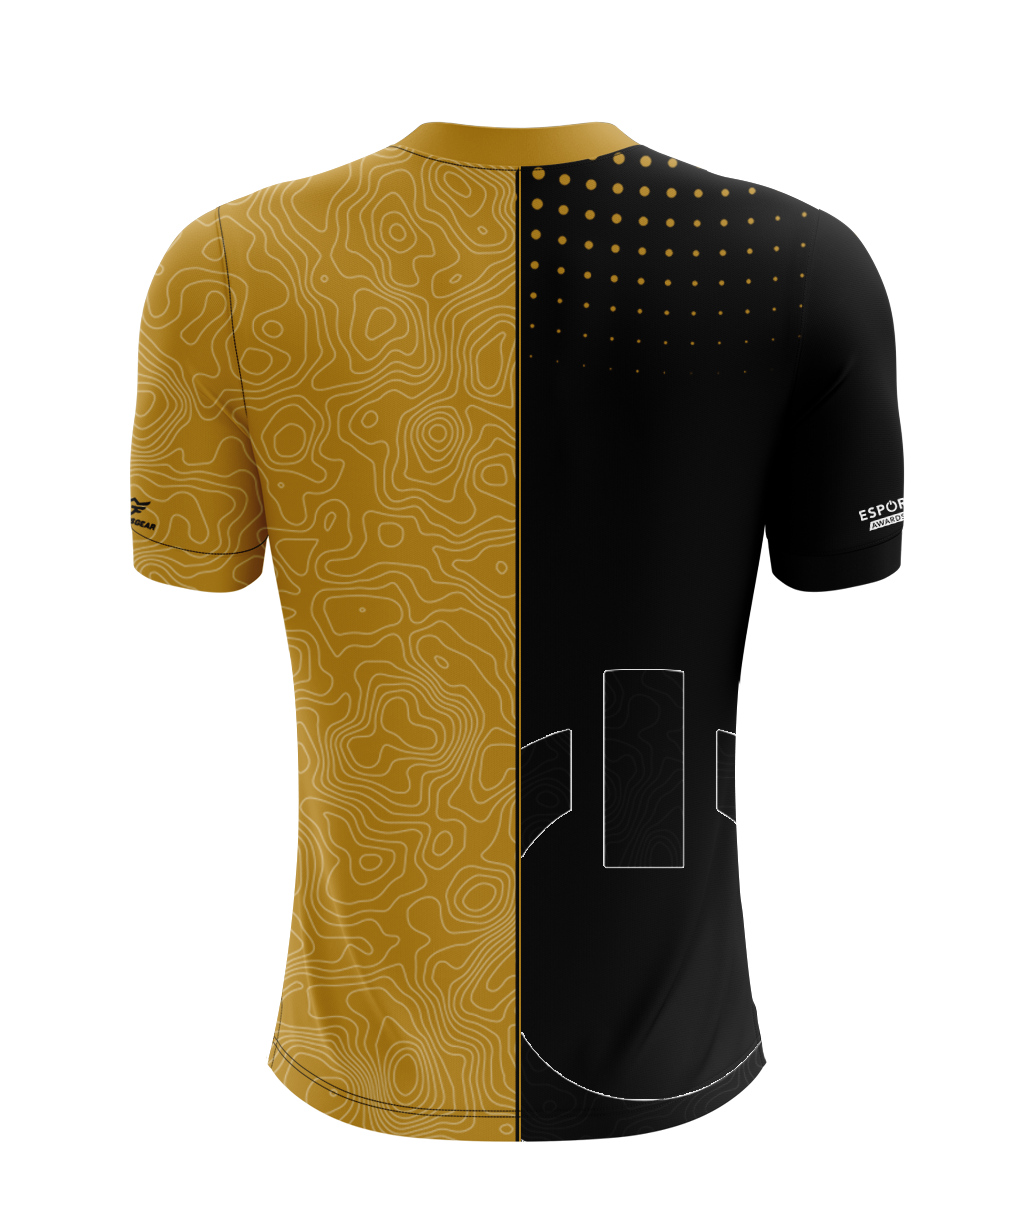 Esports Awards 2020 Special Edition Black Jersey [LIMITED TO 200 UNITS]